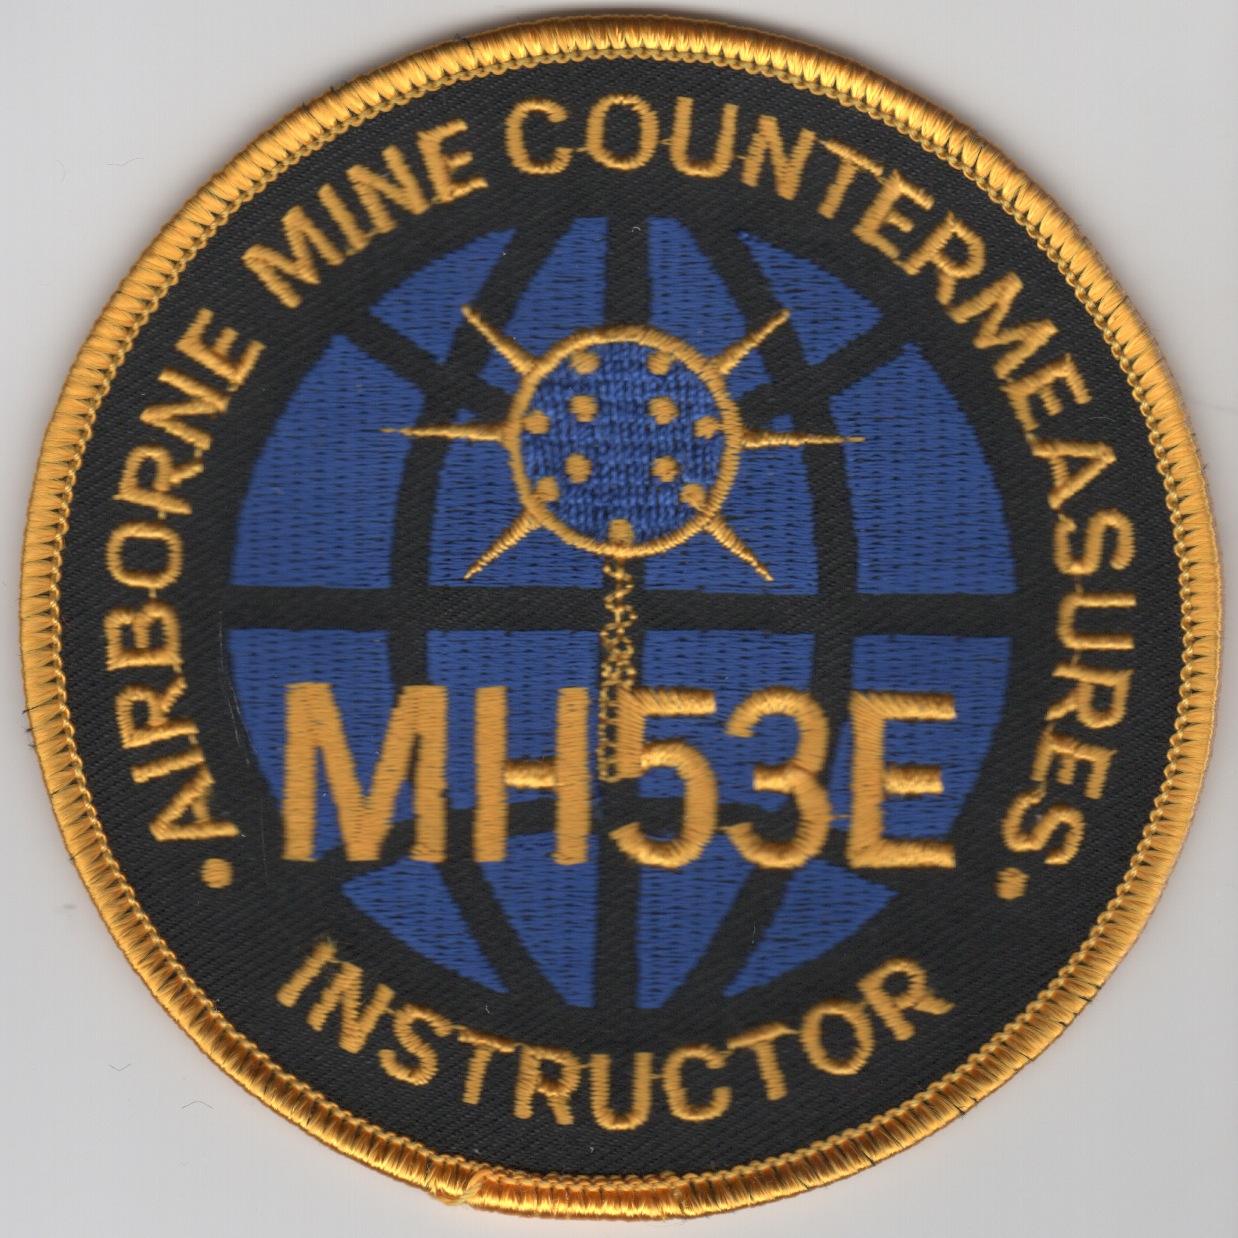 MH-53E 'Mine Counter Instructor' Patch